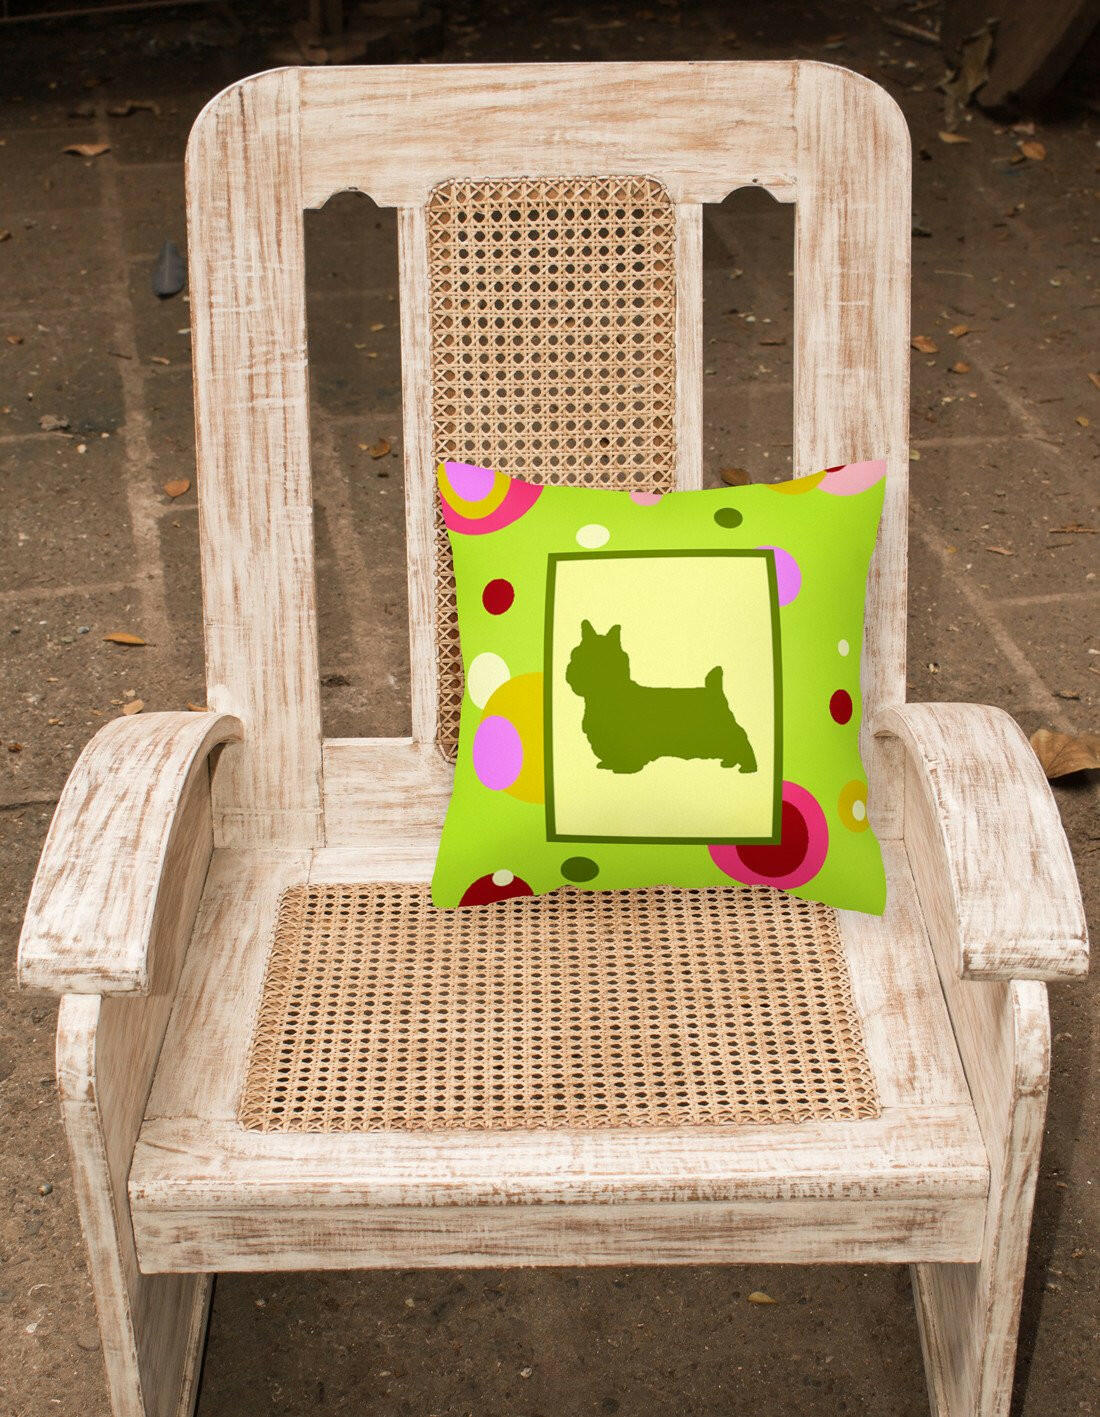 Lime Green Dots Norwich Terrier Fabric Decorative Pillow CK1056PW1414 by Caroline's Treasures